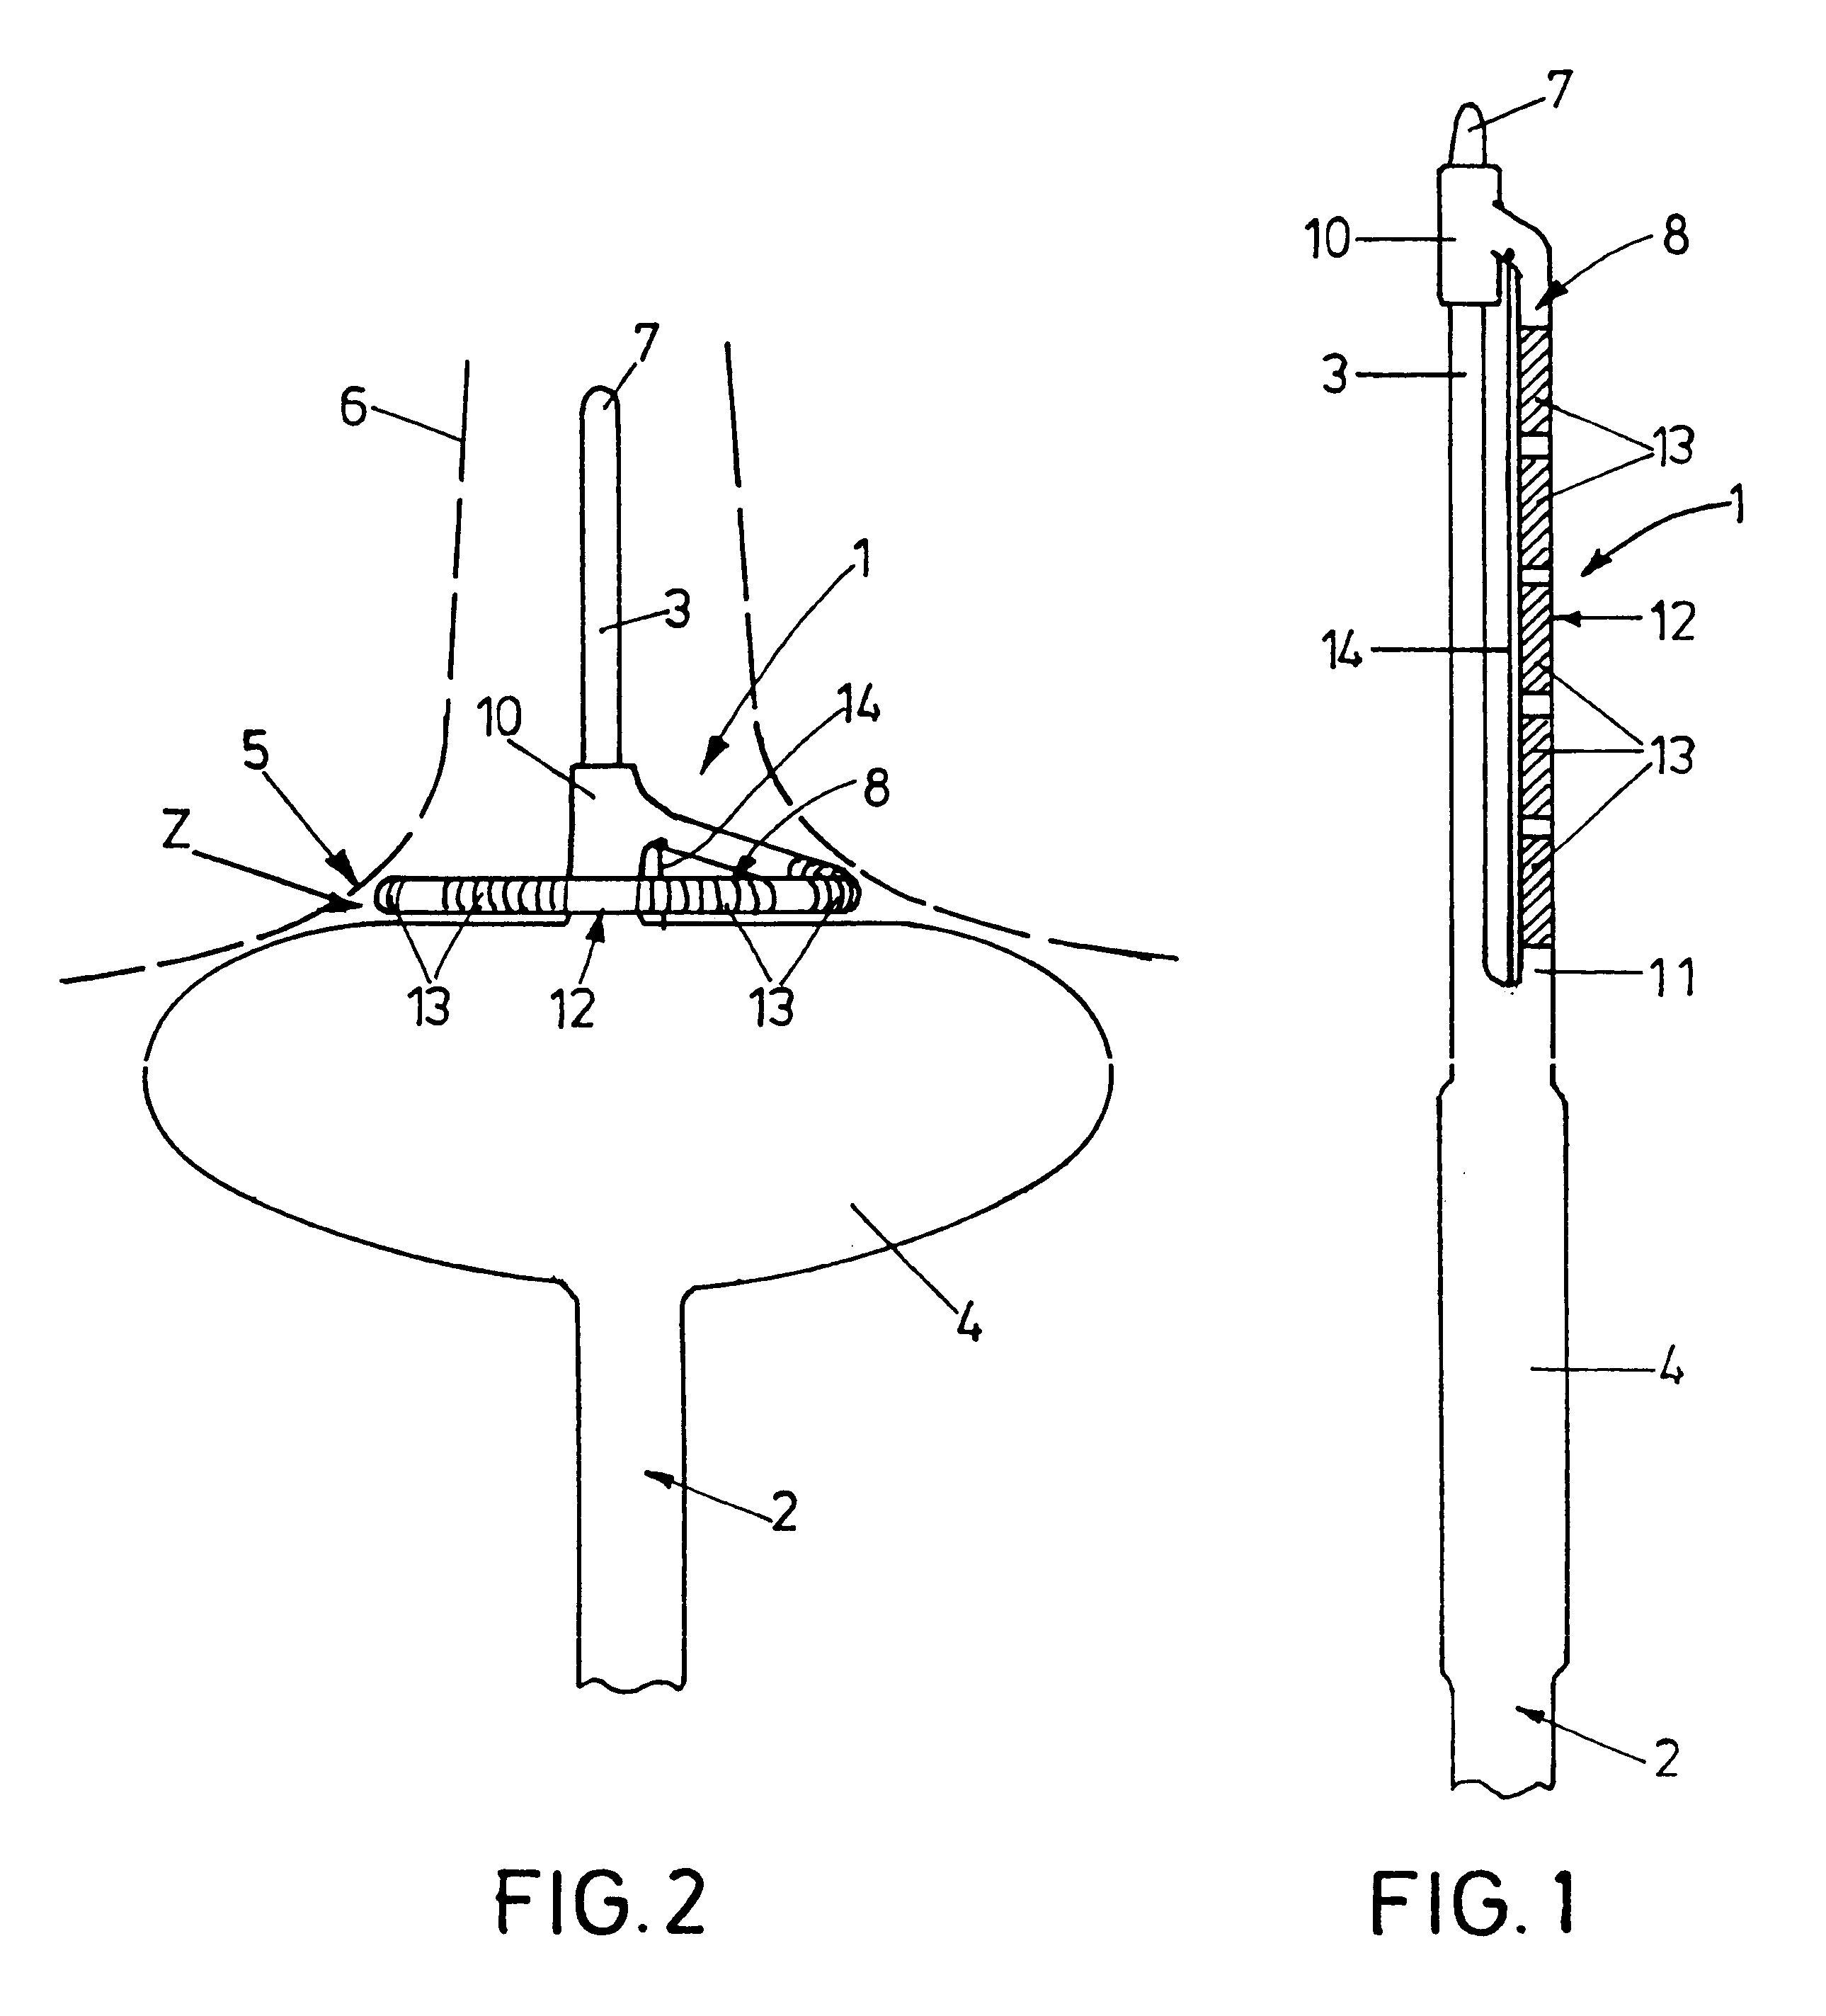 Ablation device for cardiac tissue, especially for forming a circular lesion around a vessel orifice in the heart